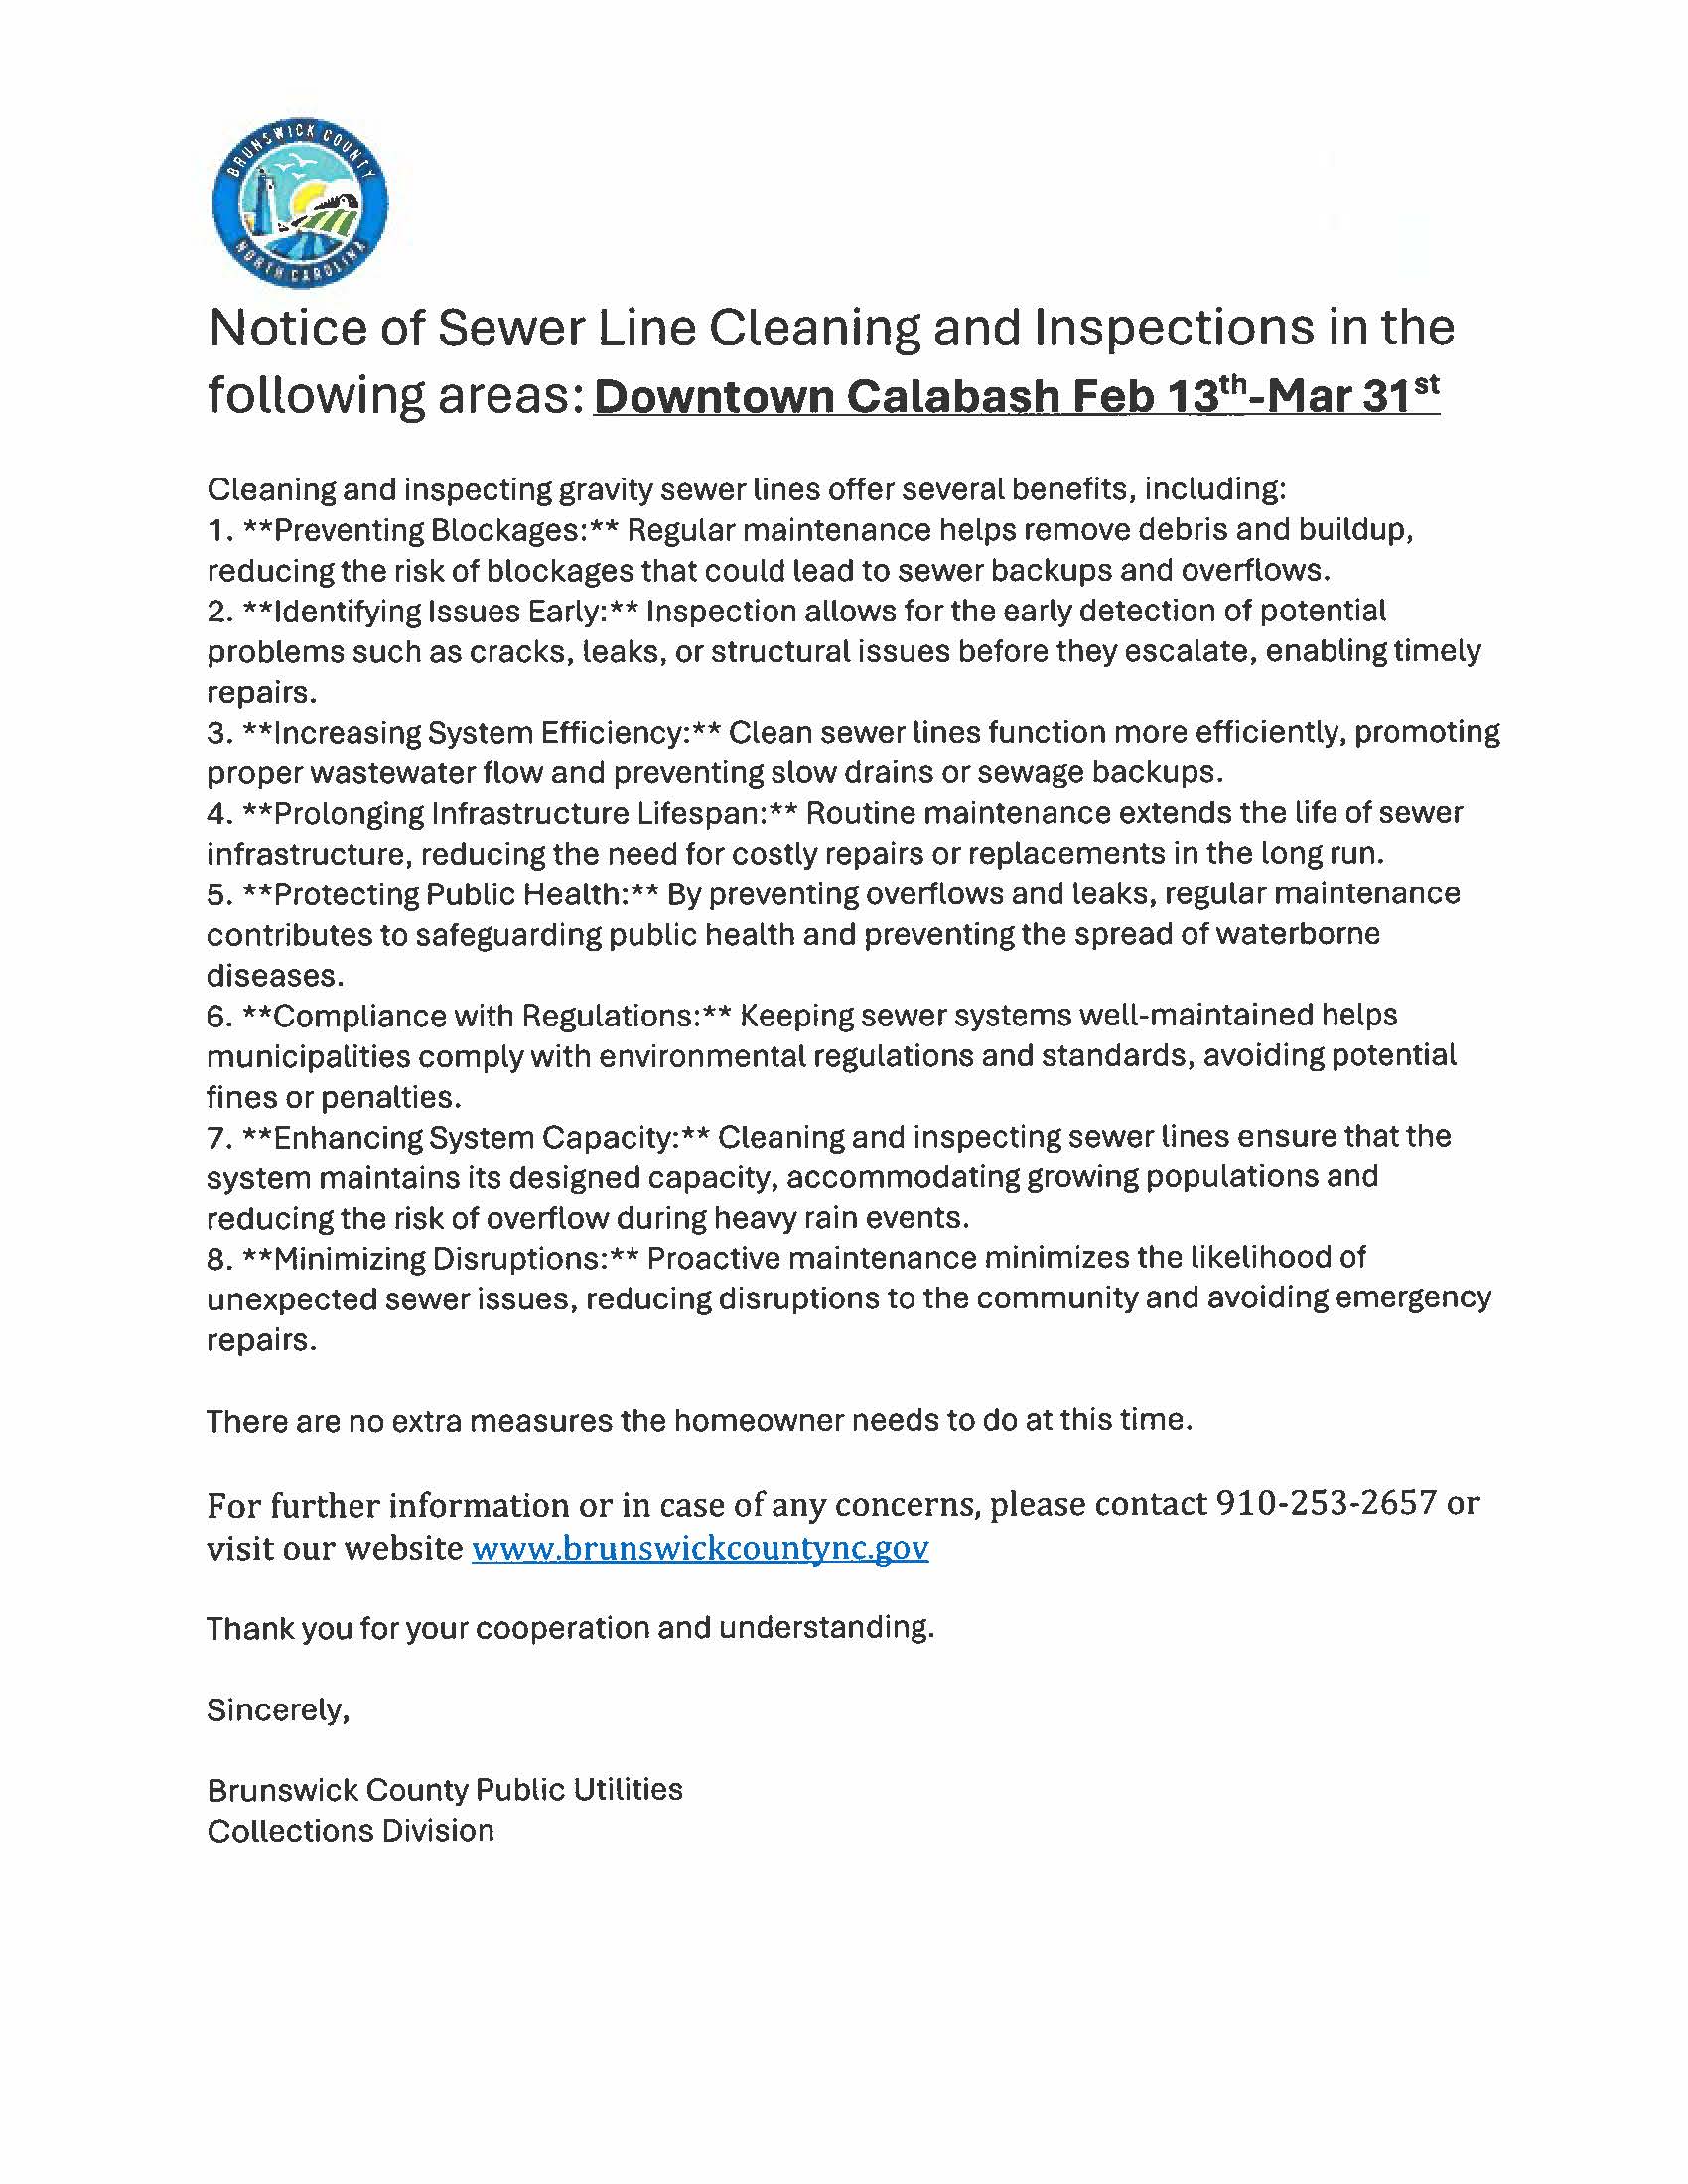 Notice of Sewer Line Cleaning and Inspection Calabash